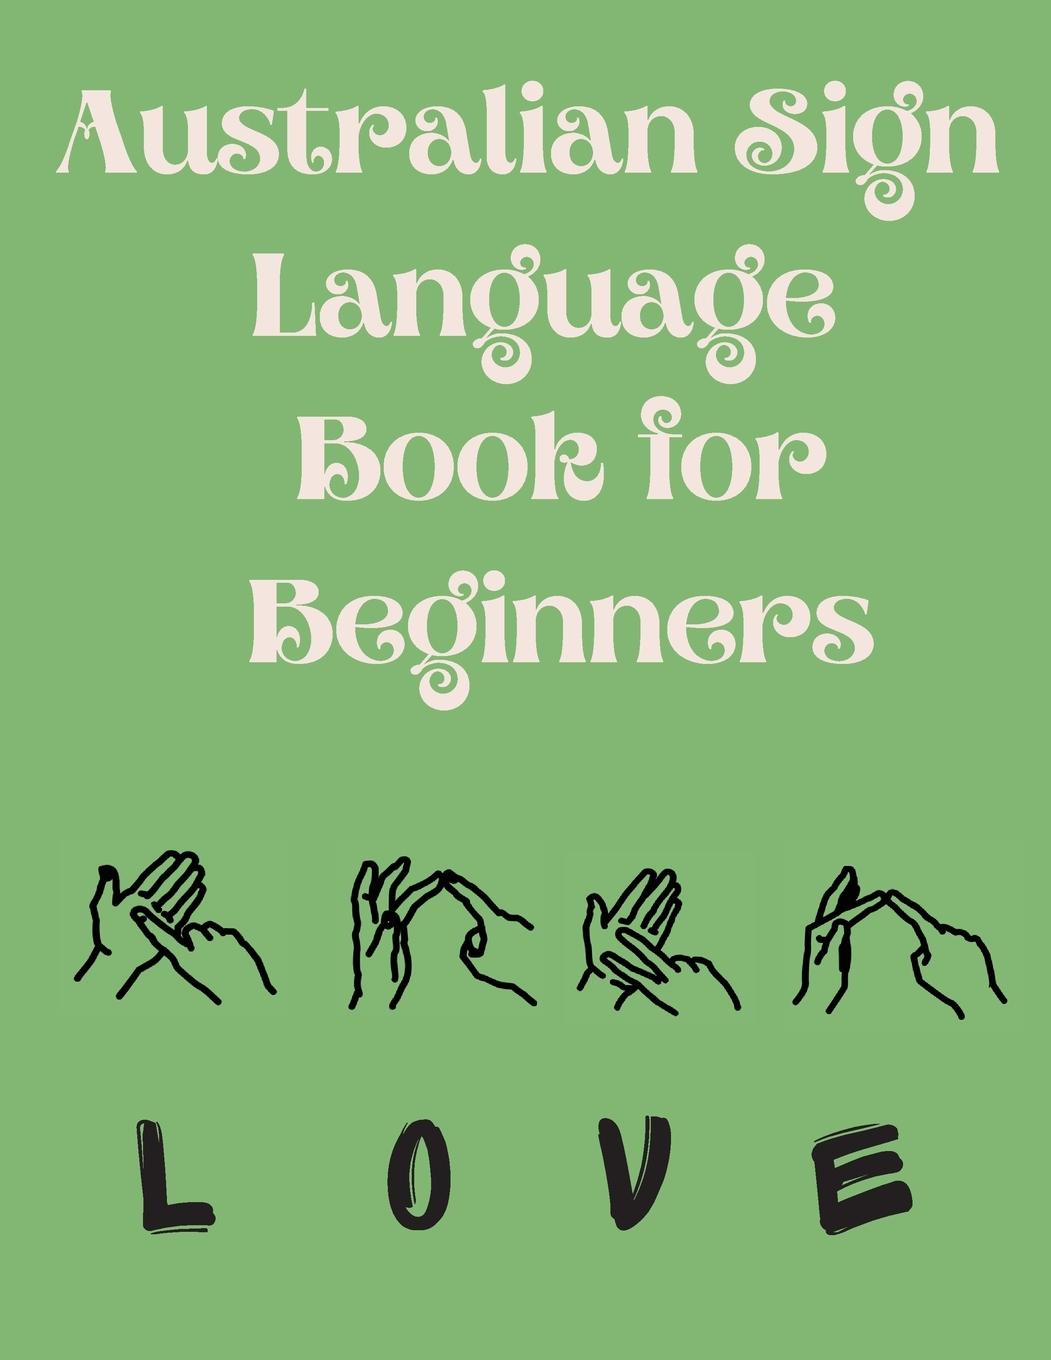 Kniha Australian Sign Language Book for Beginners.Educational Book, Suitable for Children, Teens and Adults. Contains the AUSLAN Alphabet and Numbers 